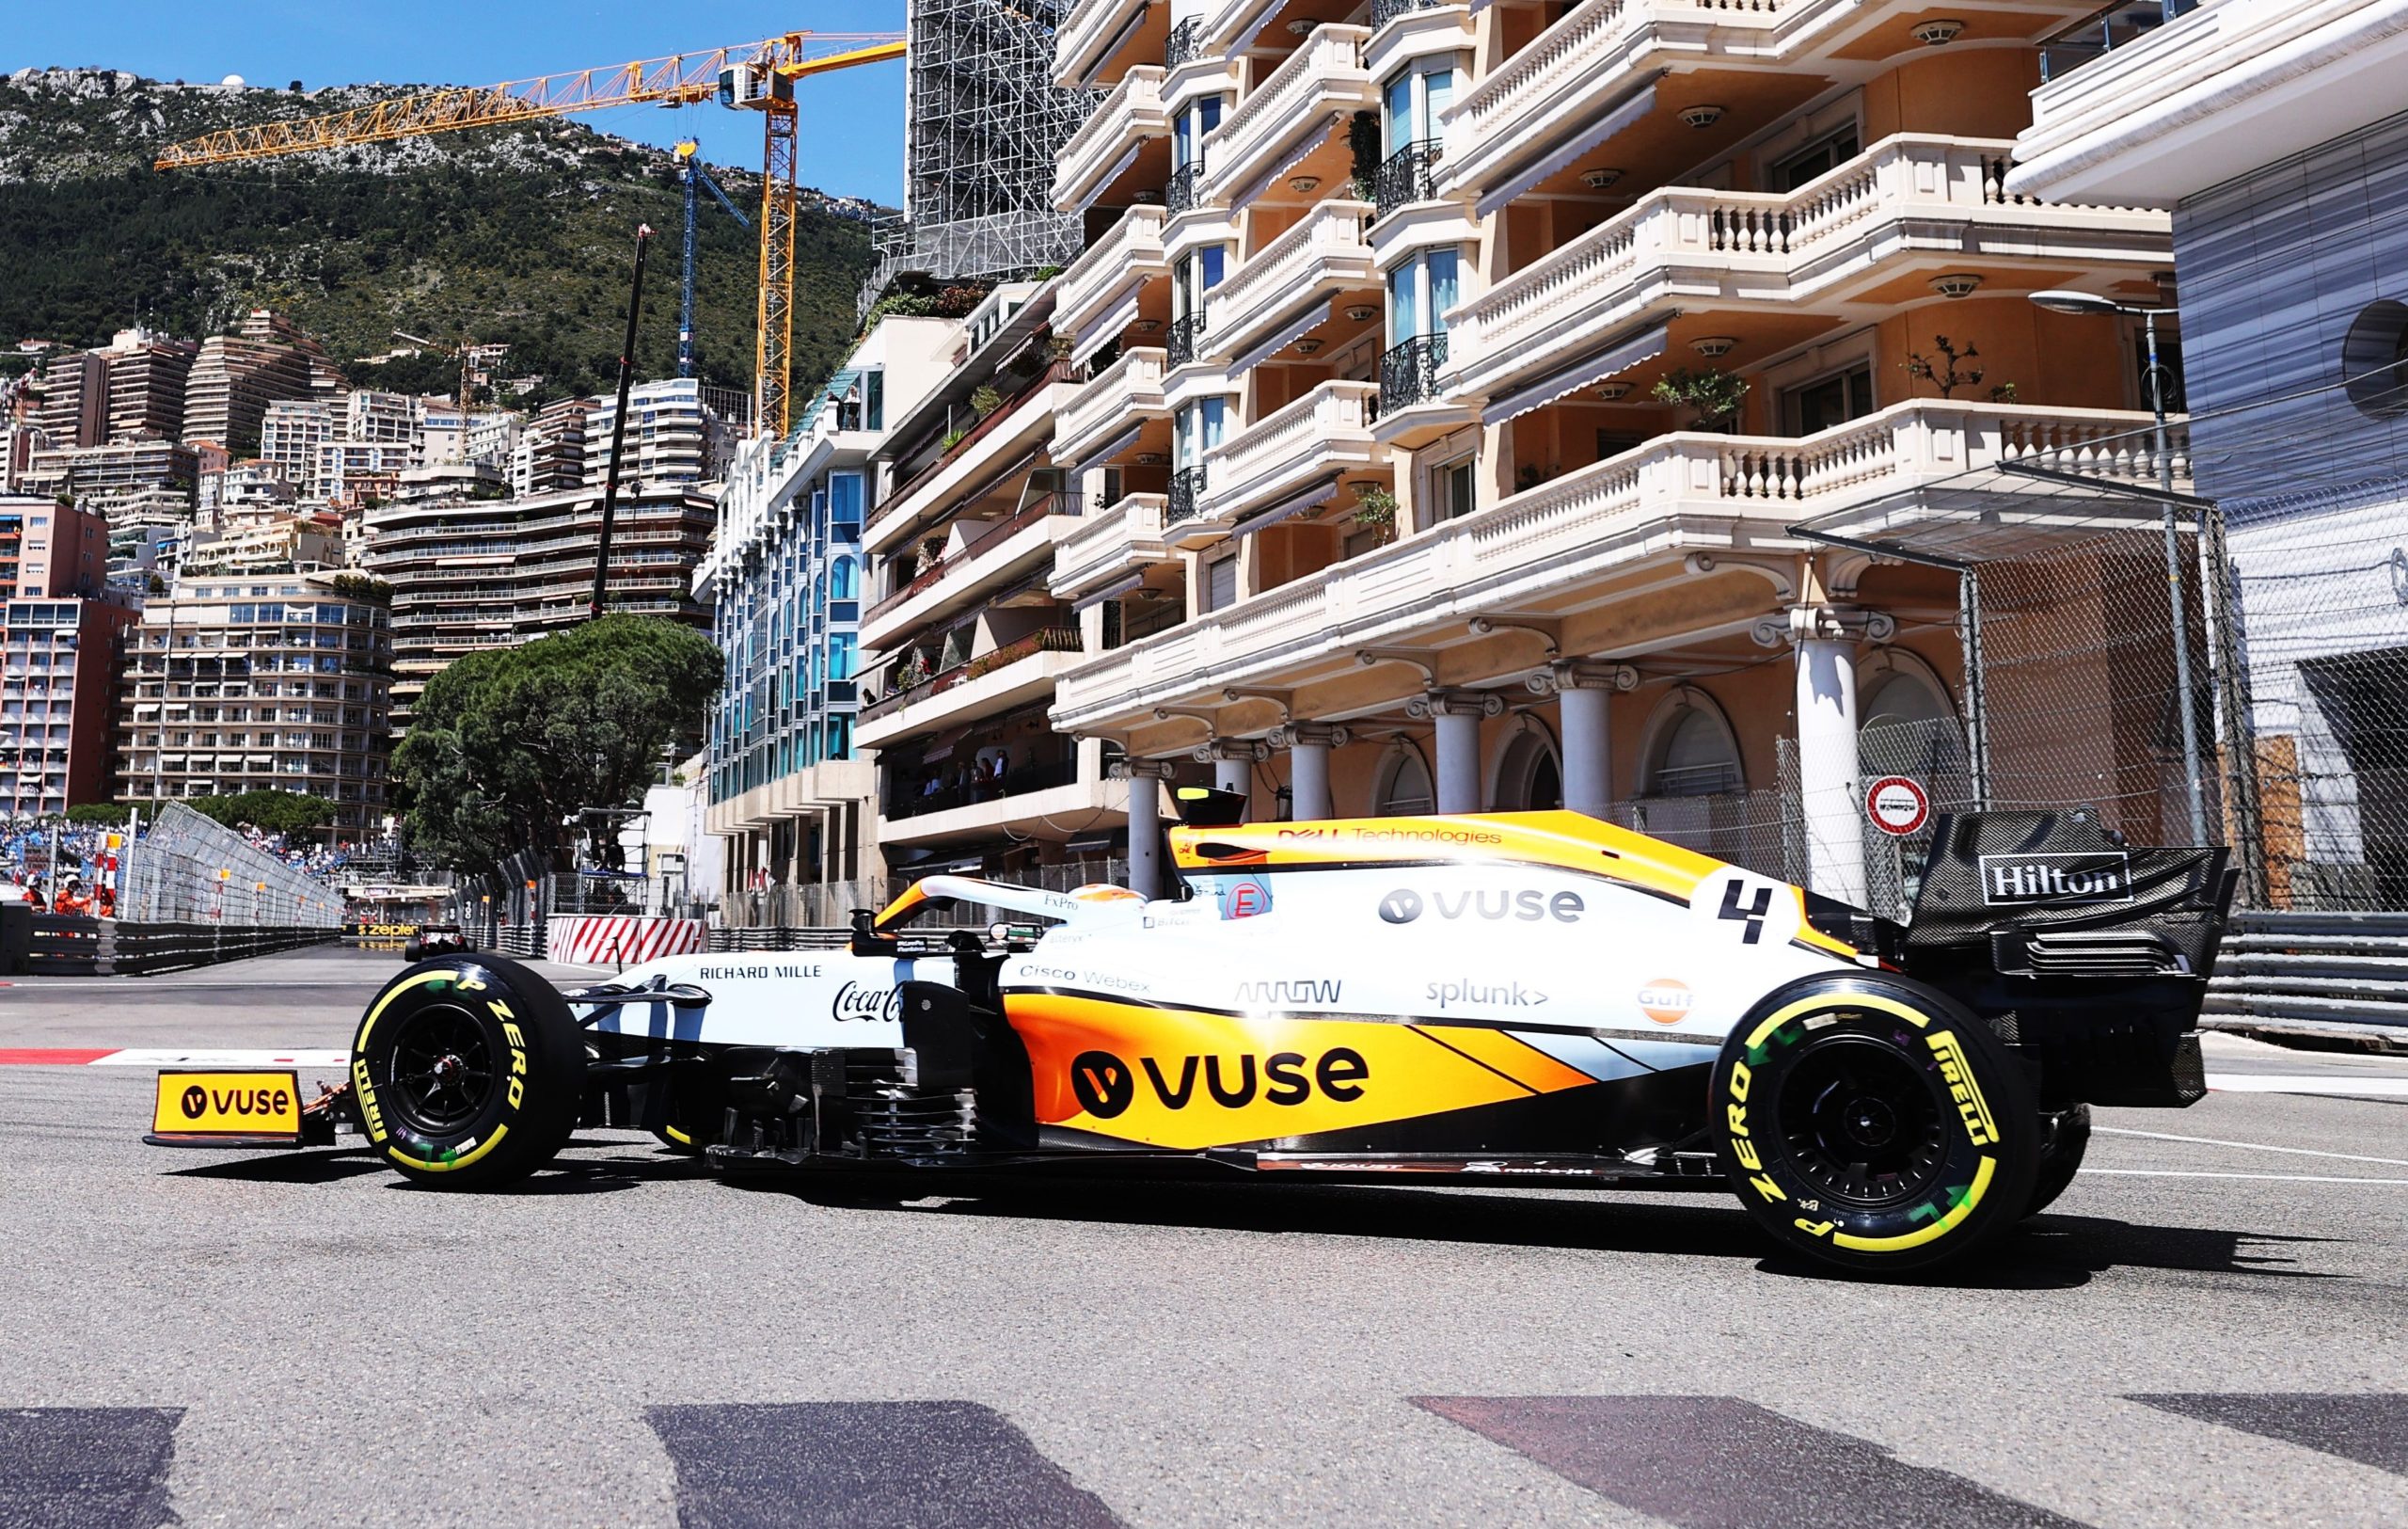 Mclaren's one-off Gulf livery debuts at Monaco